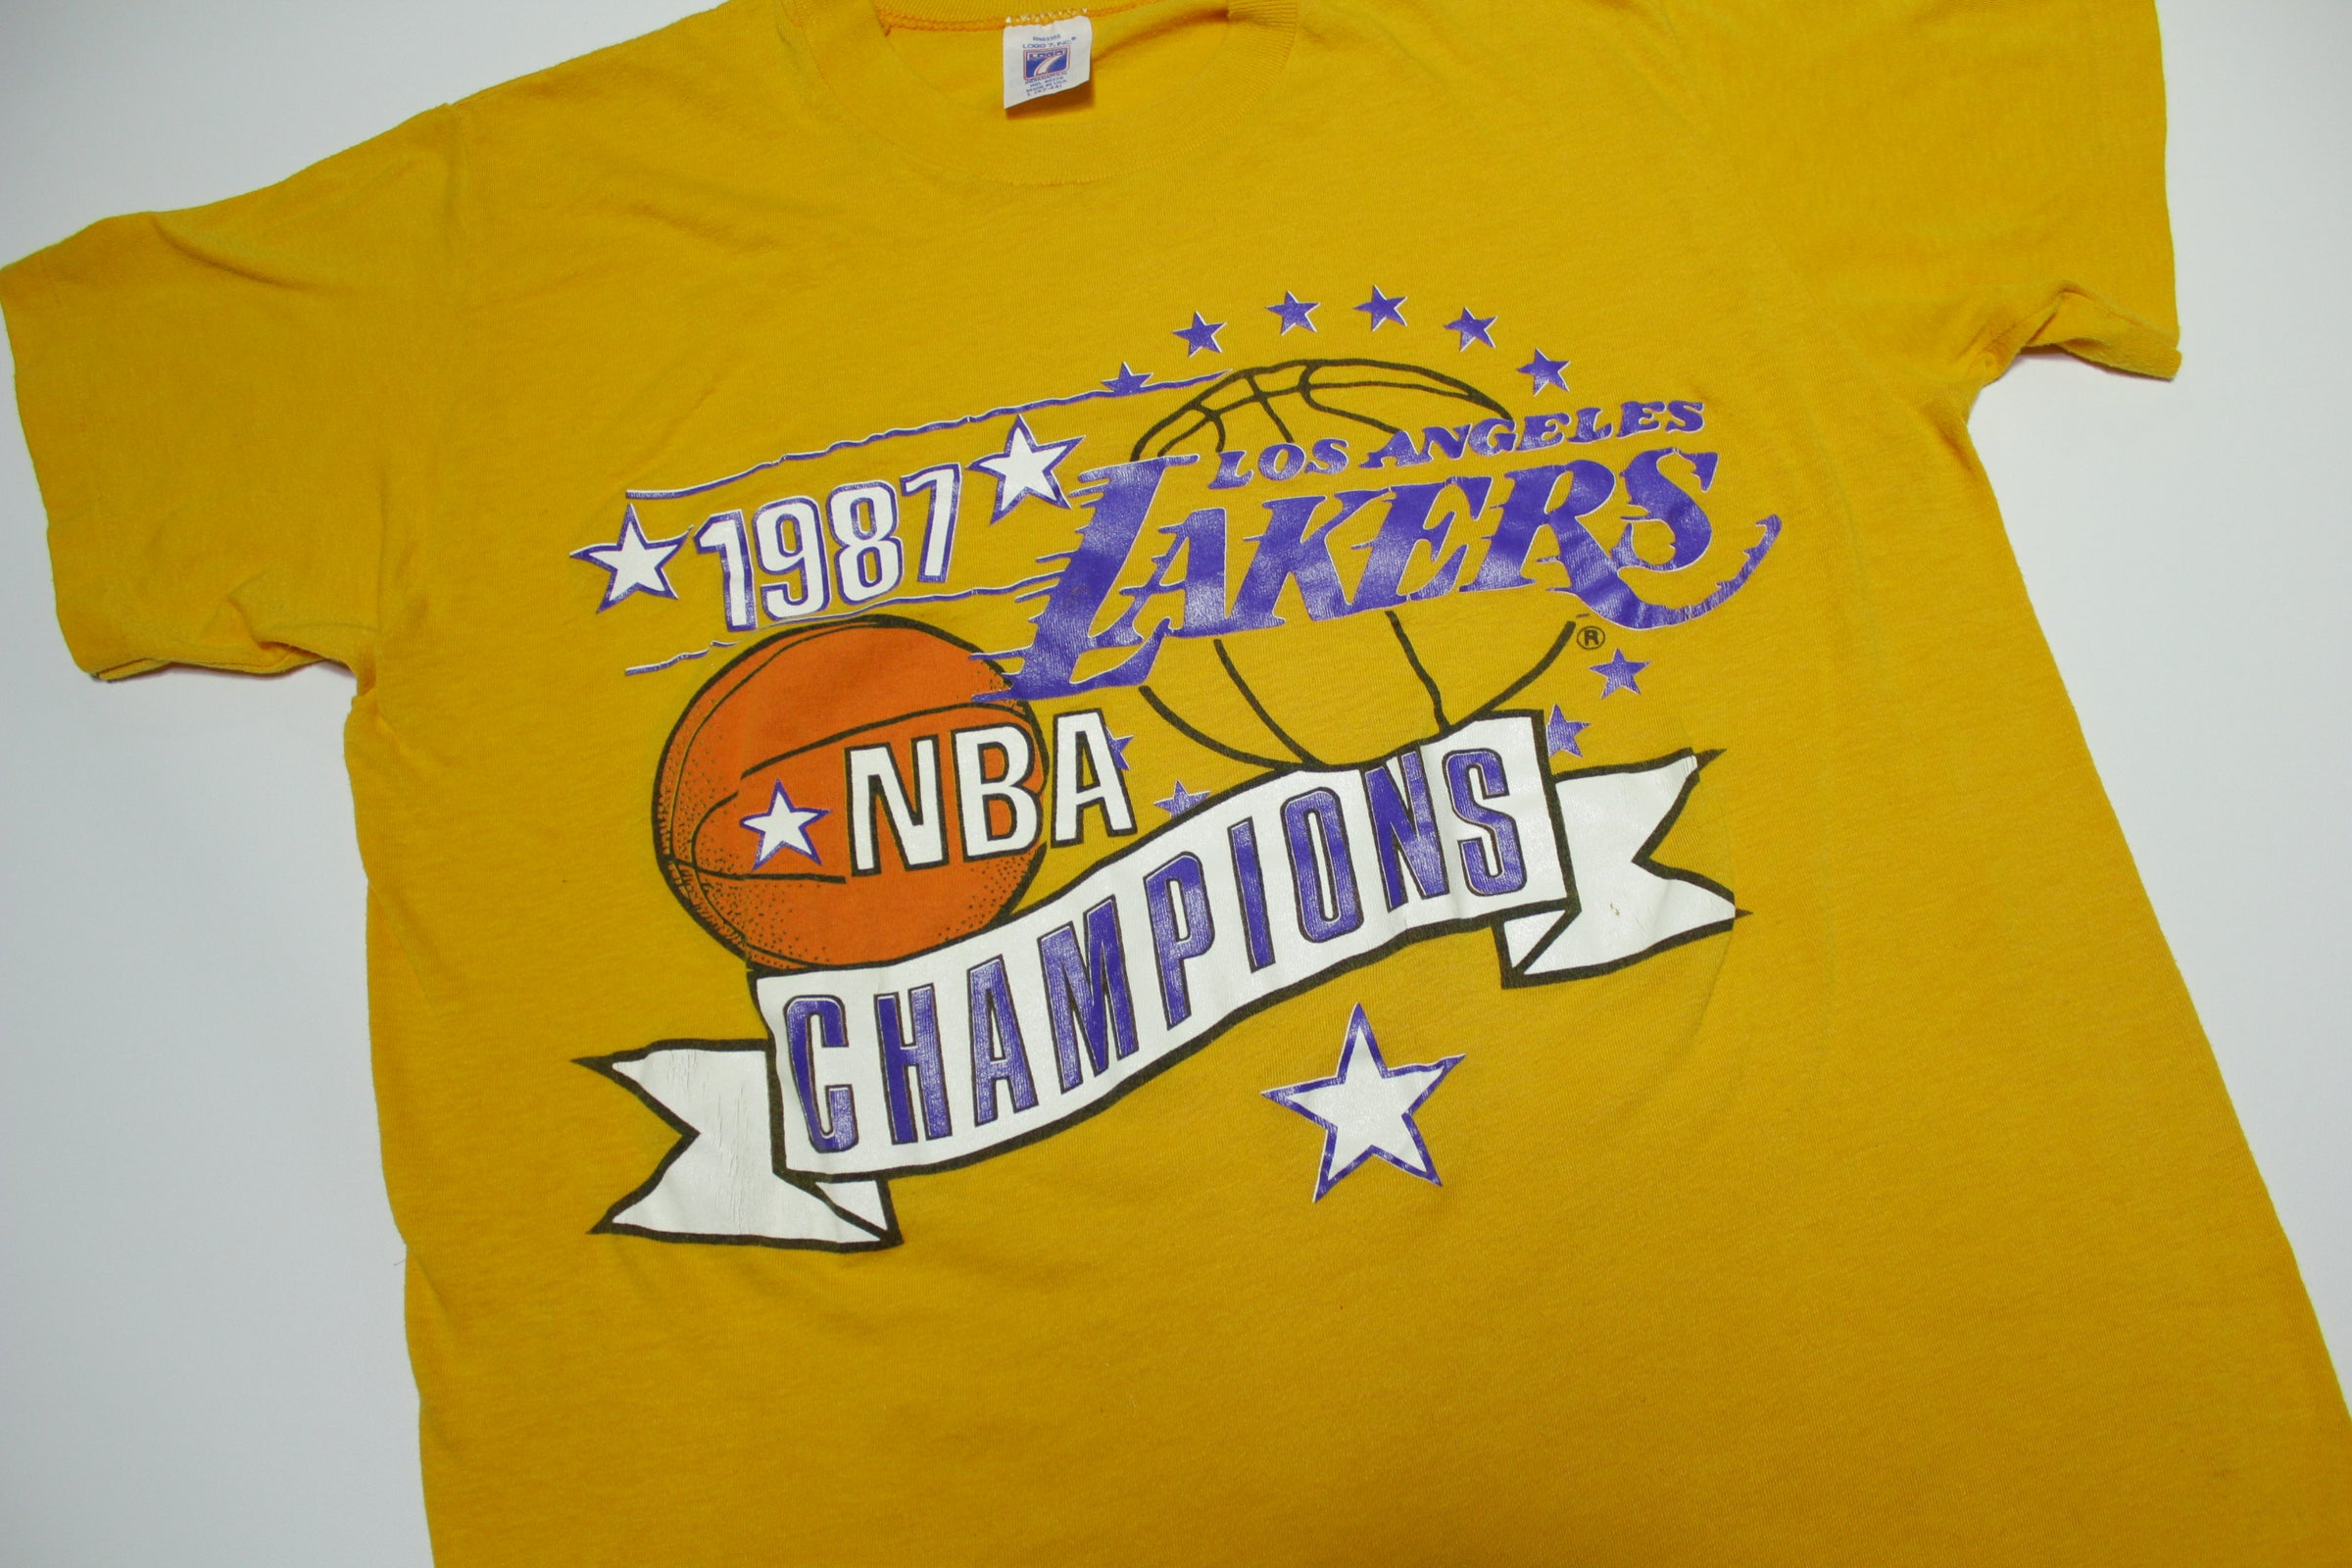 VINTAGE NBA LOS ANGELES LAKERS WORLD CHAMPS 1987 TEE SHIRT SIZE